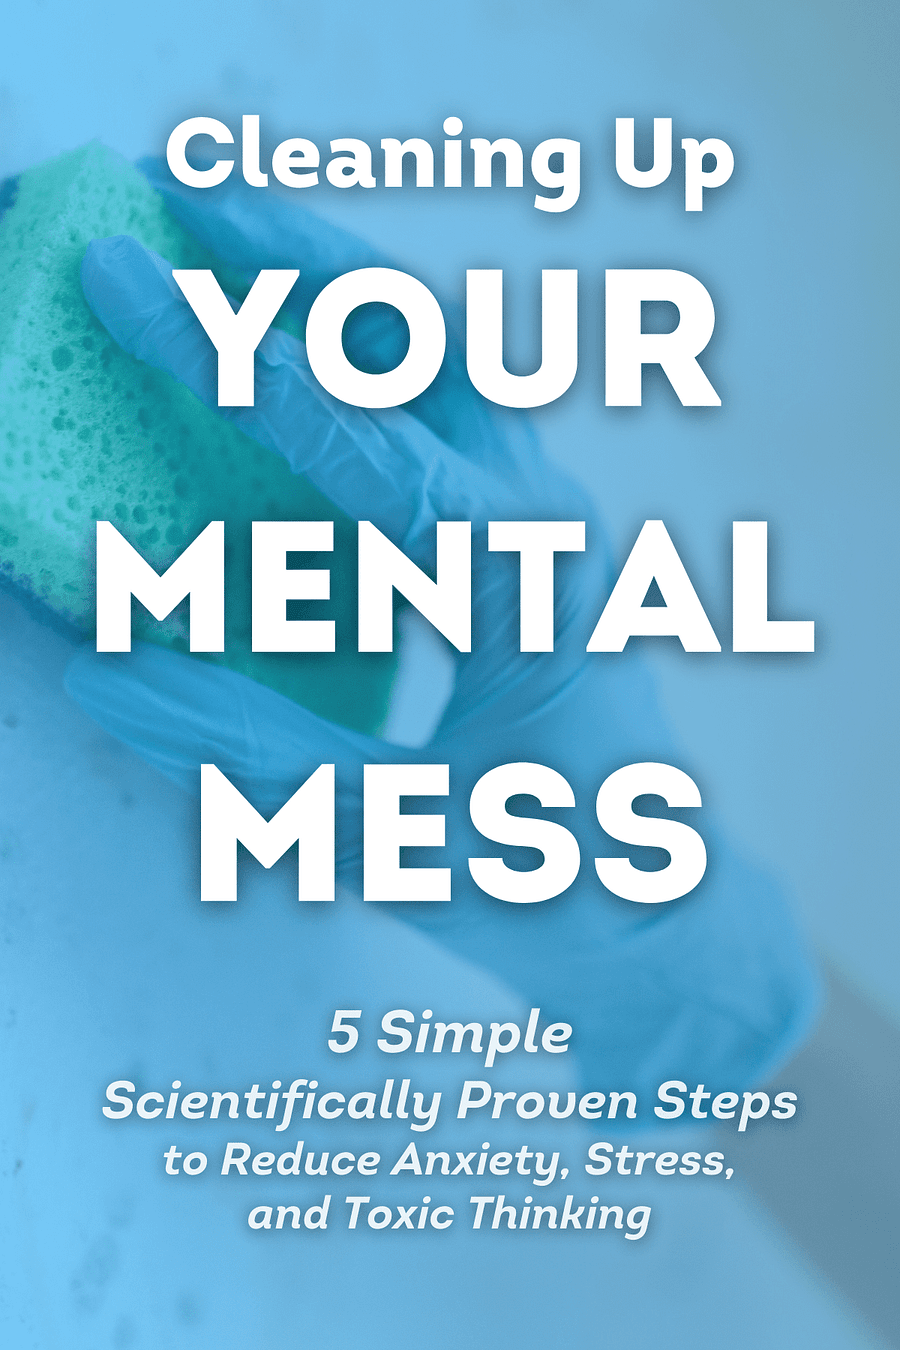 Cleaning Up Your Mental Mess by Dr. Caroline Leaf - Book Summary